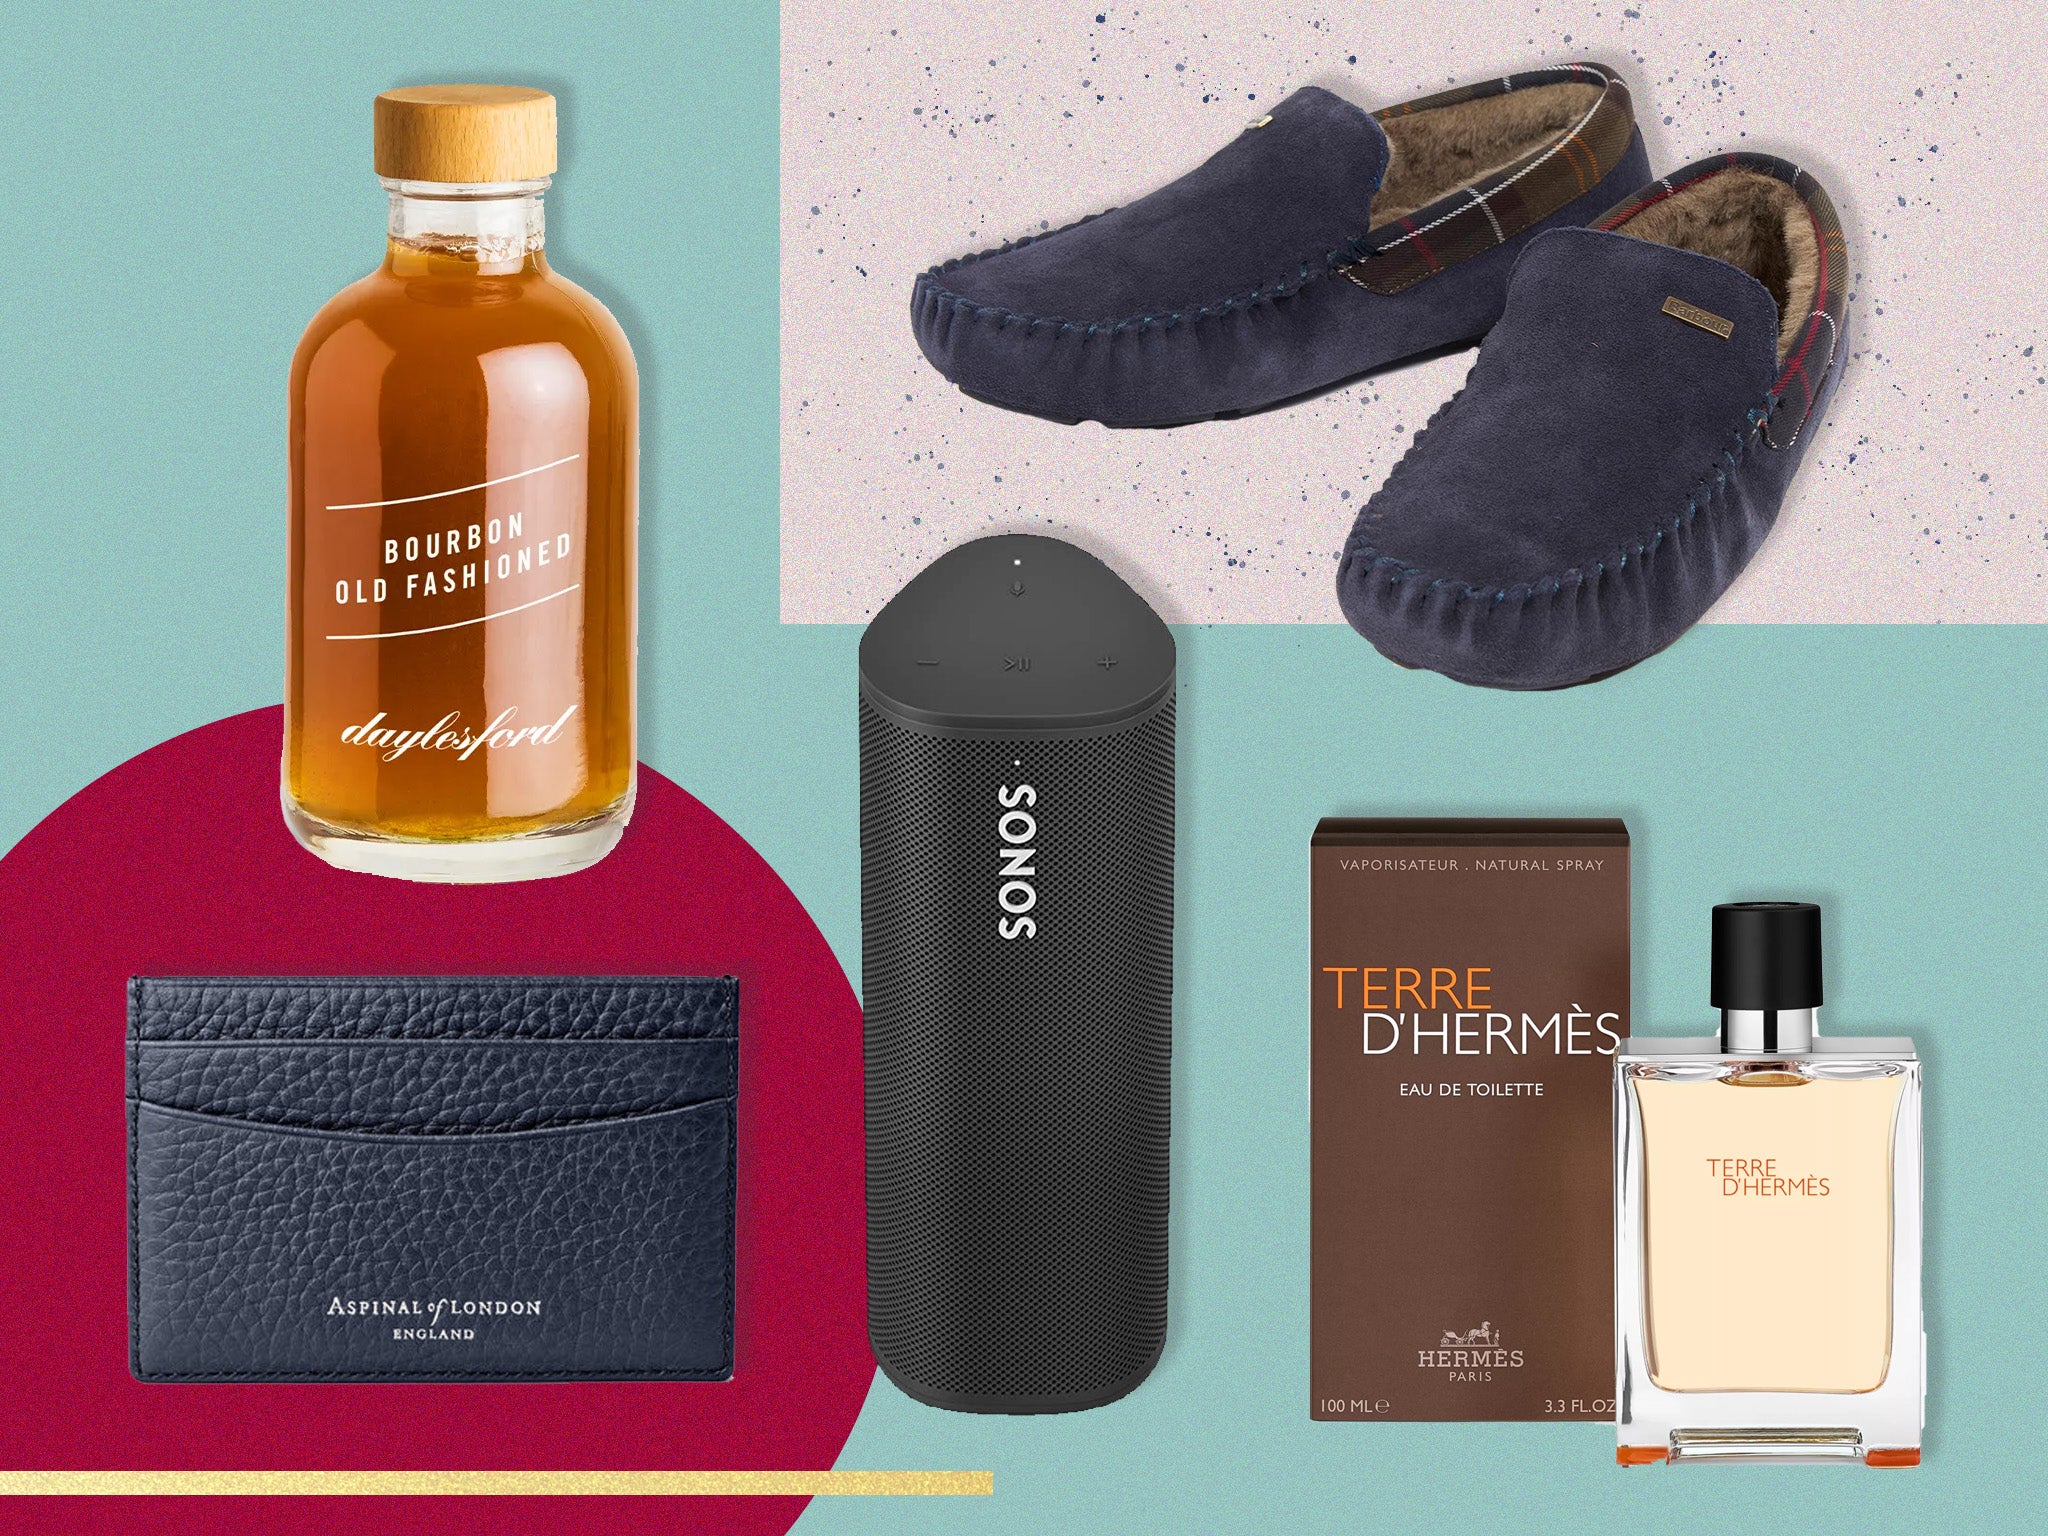 Unique Gifts for Men in Their 30s - Gifter World